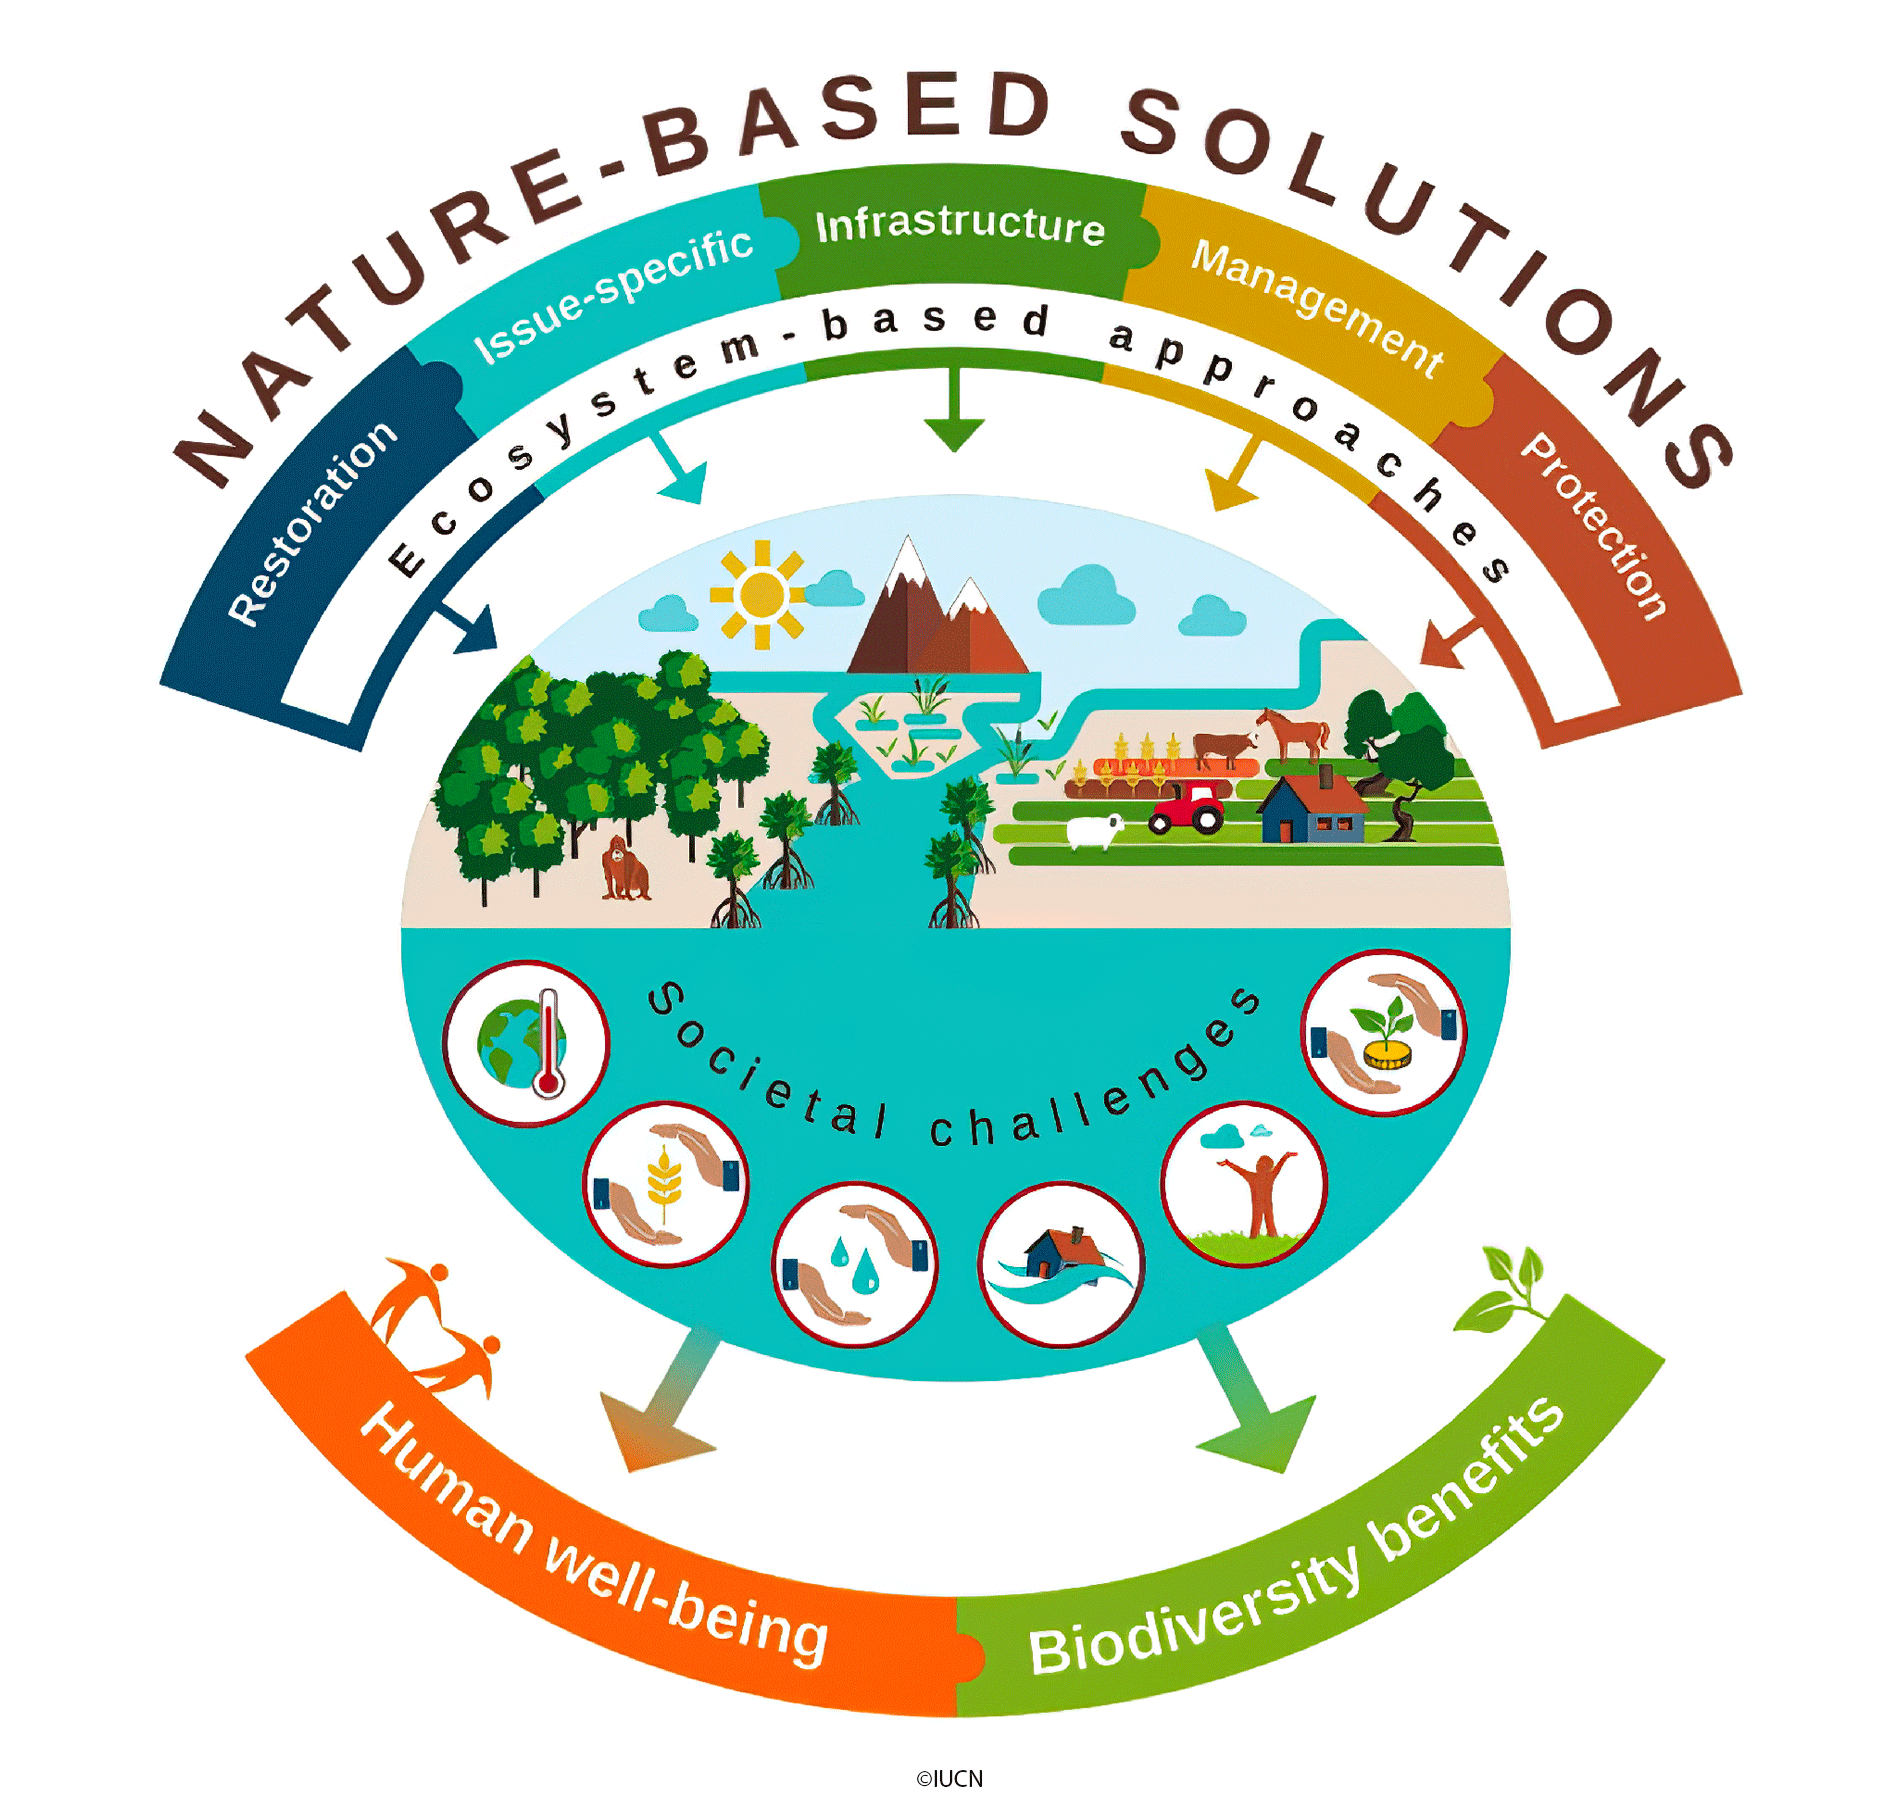 Nature-Based Solutions